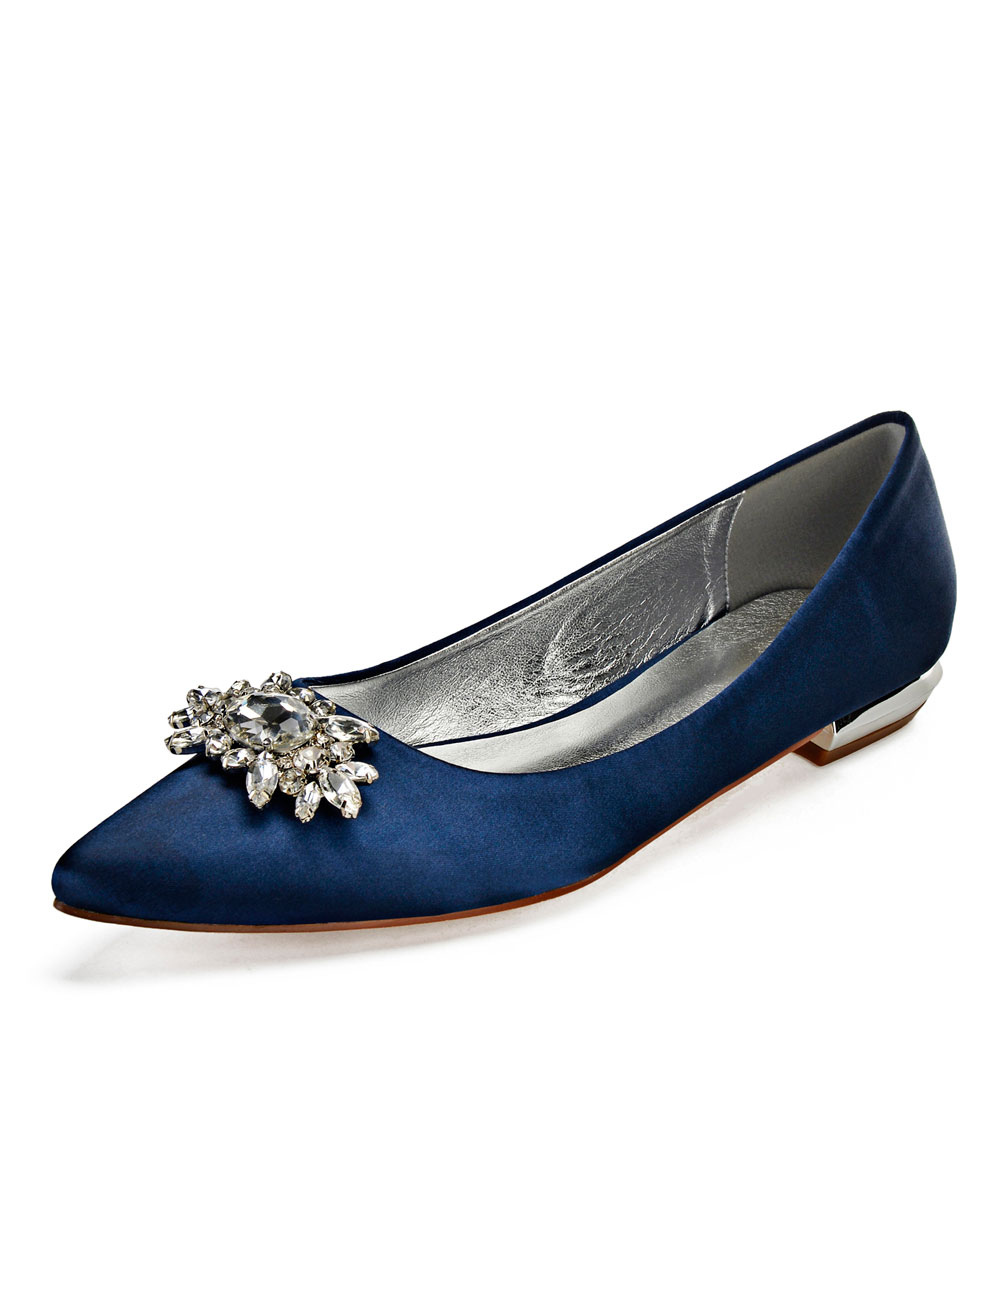 navy flat shoes